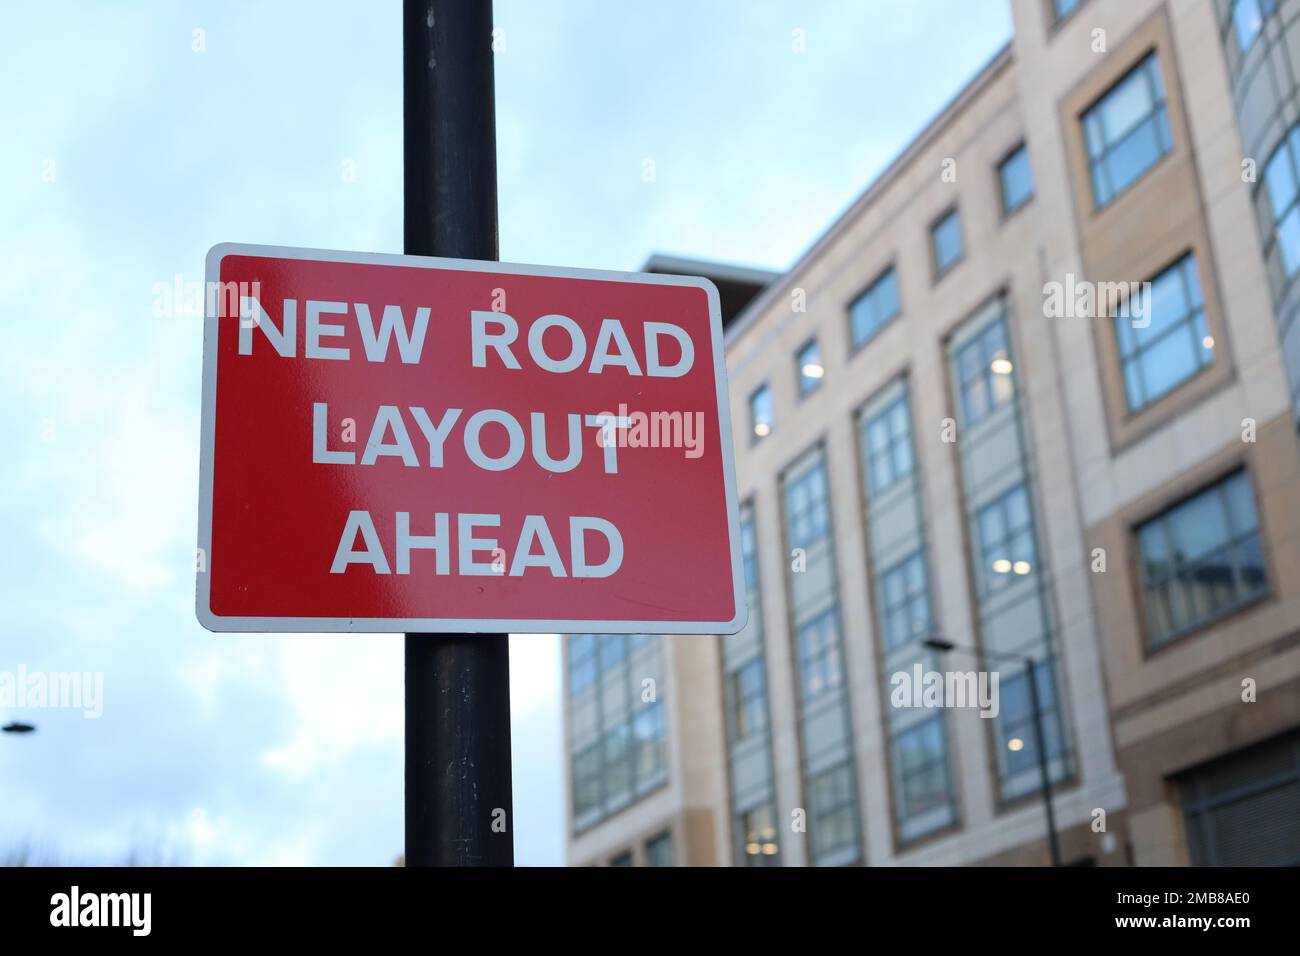 New Road Ahead sign in London Stock Photo